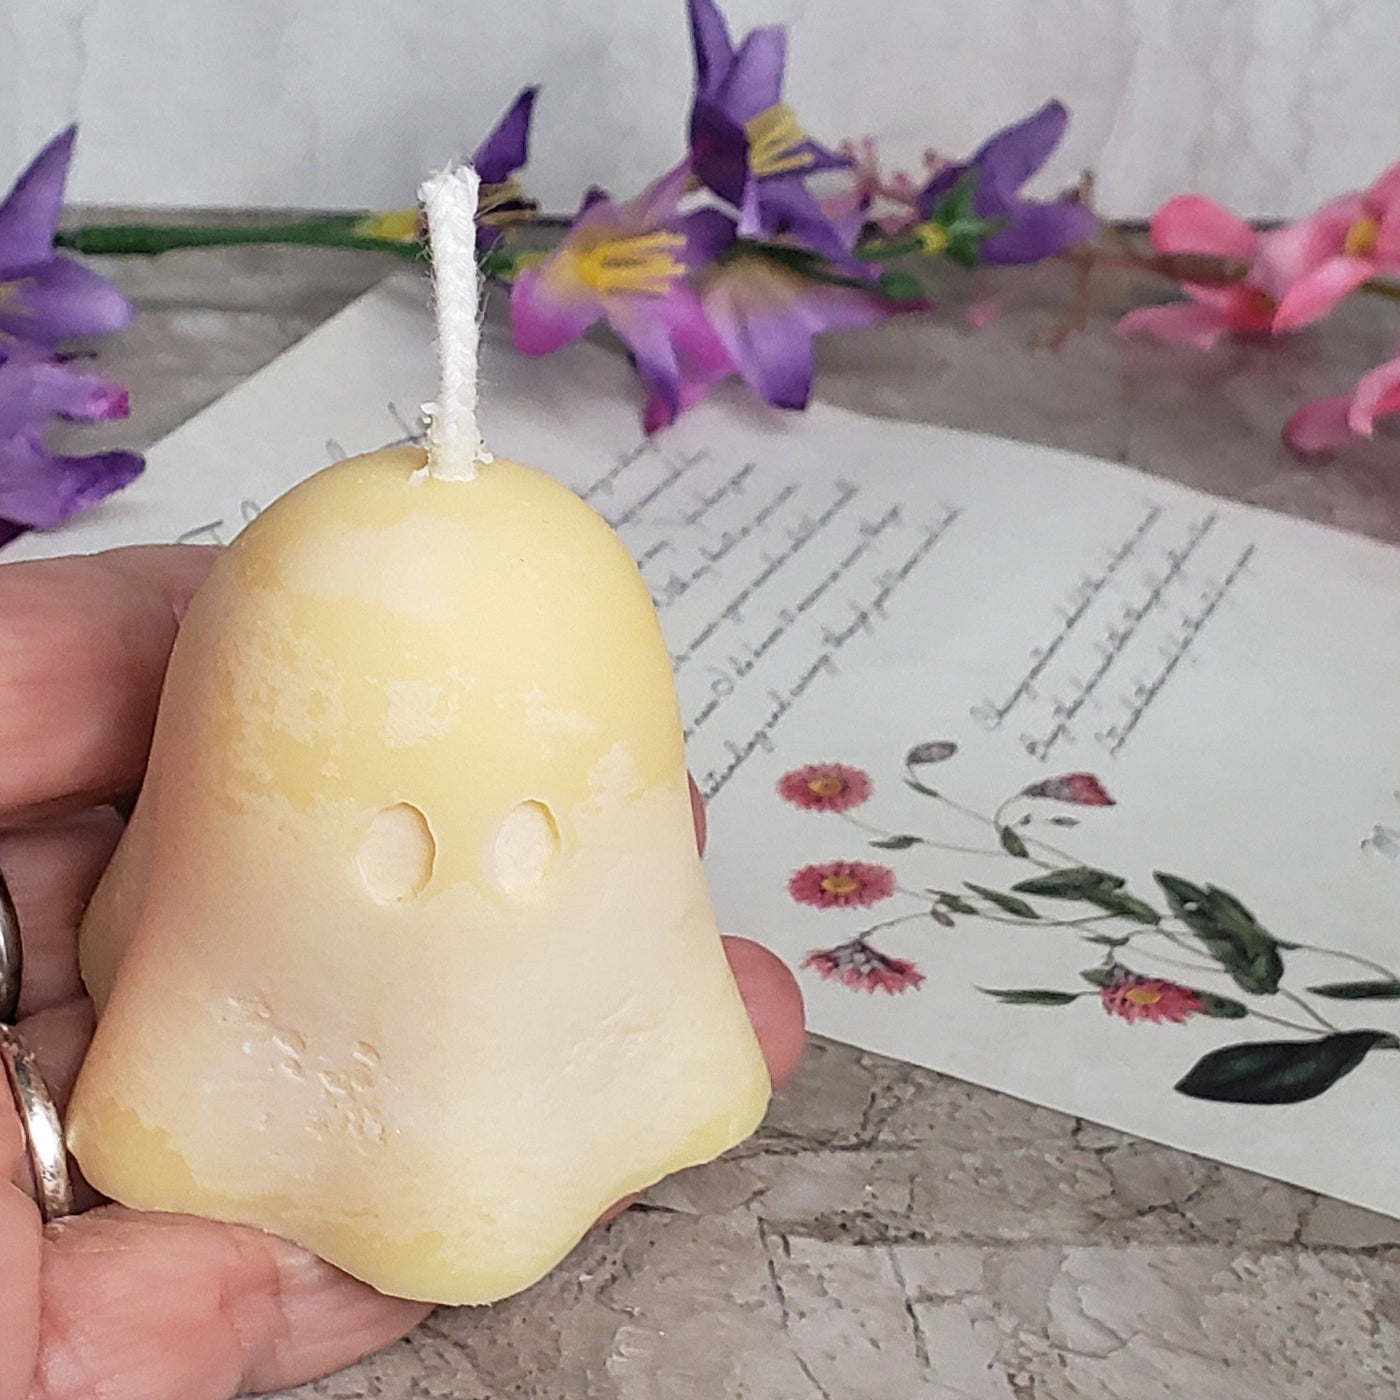 Soy Wax Ghost Candle, Soy Candle, Halloween Candle, Scented: LavenderSageRosmary / White